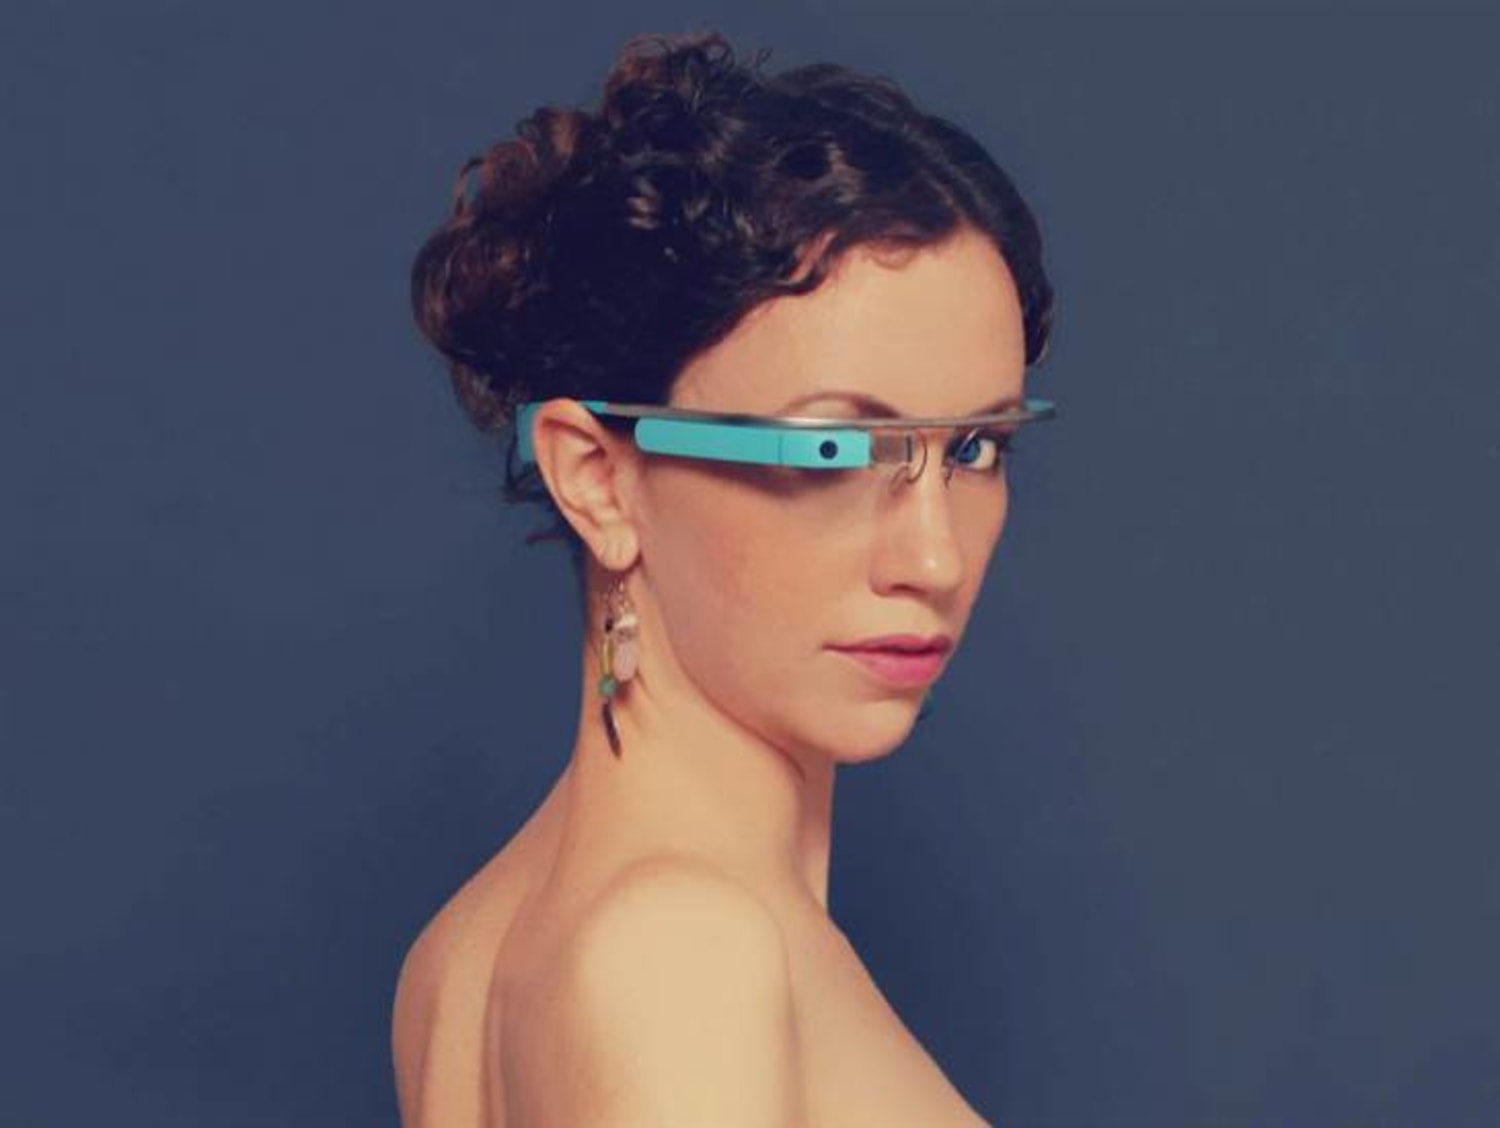 Big Blocksex Com - Google will block sex and violence from Glass (but hasn't yet)